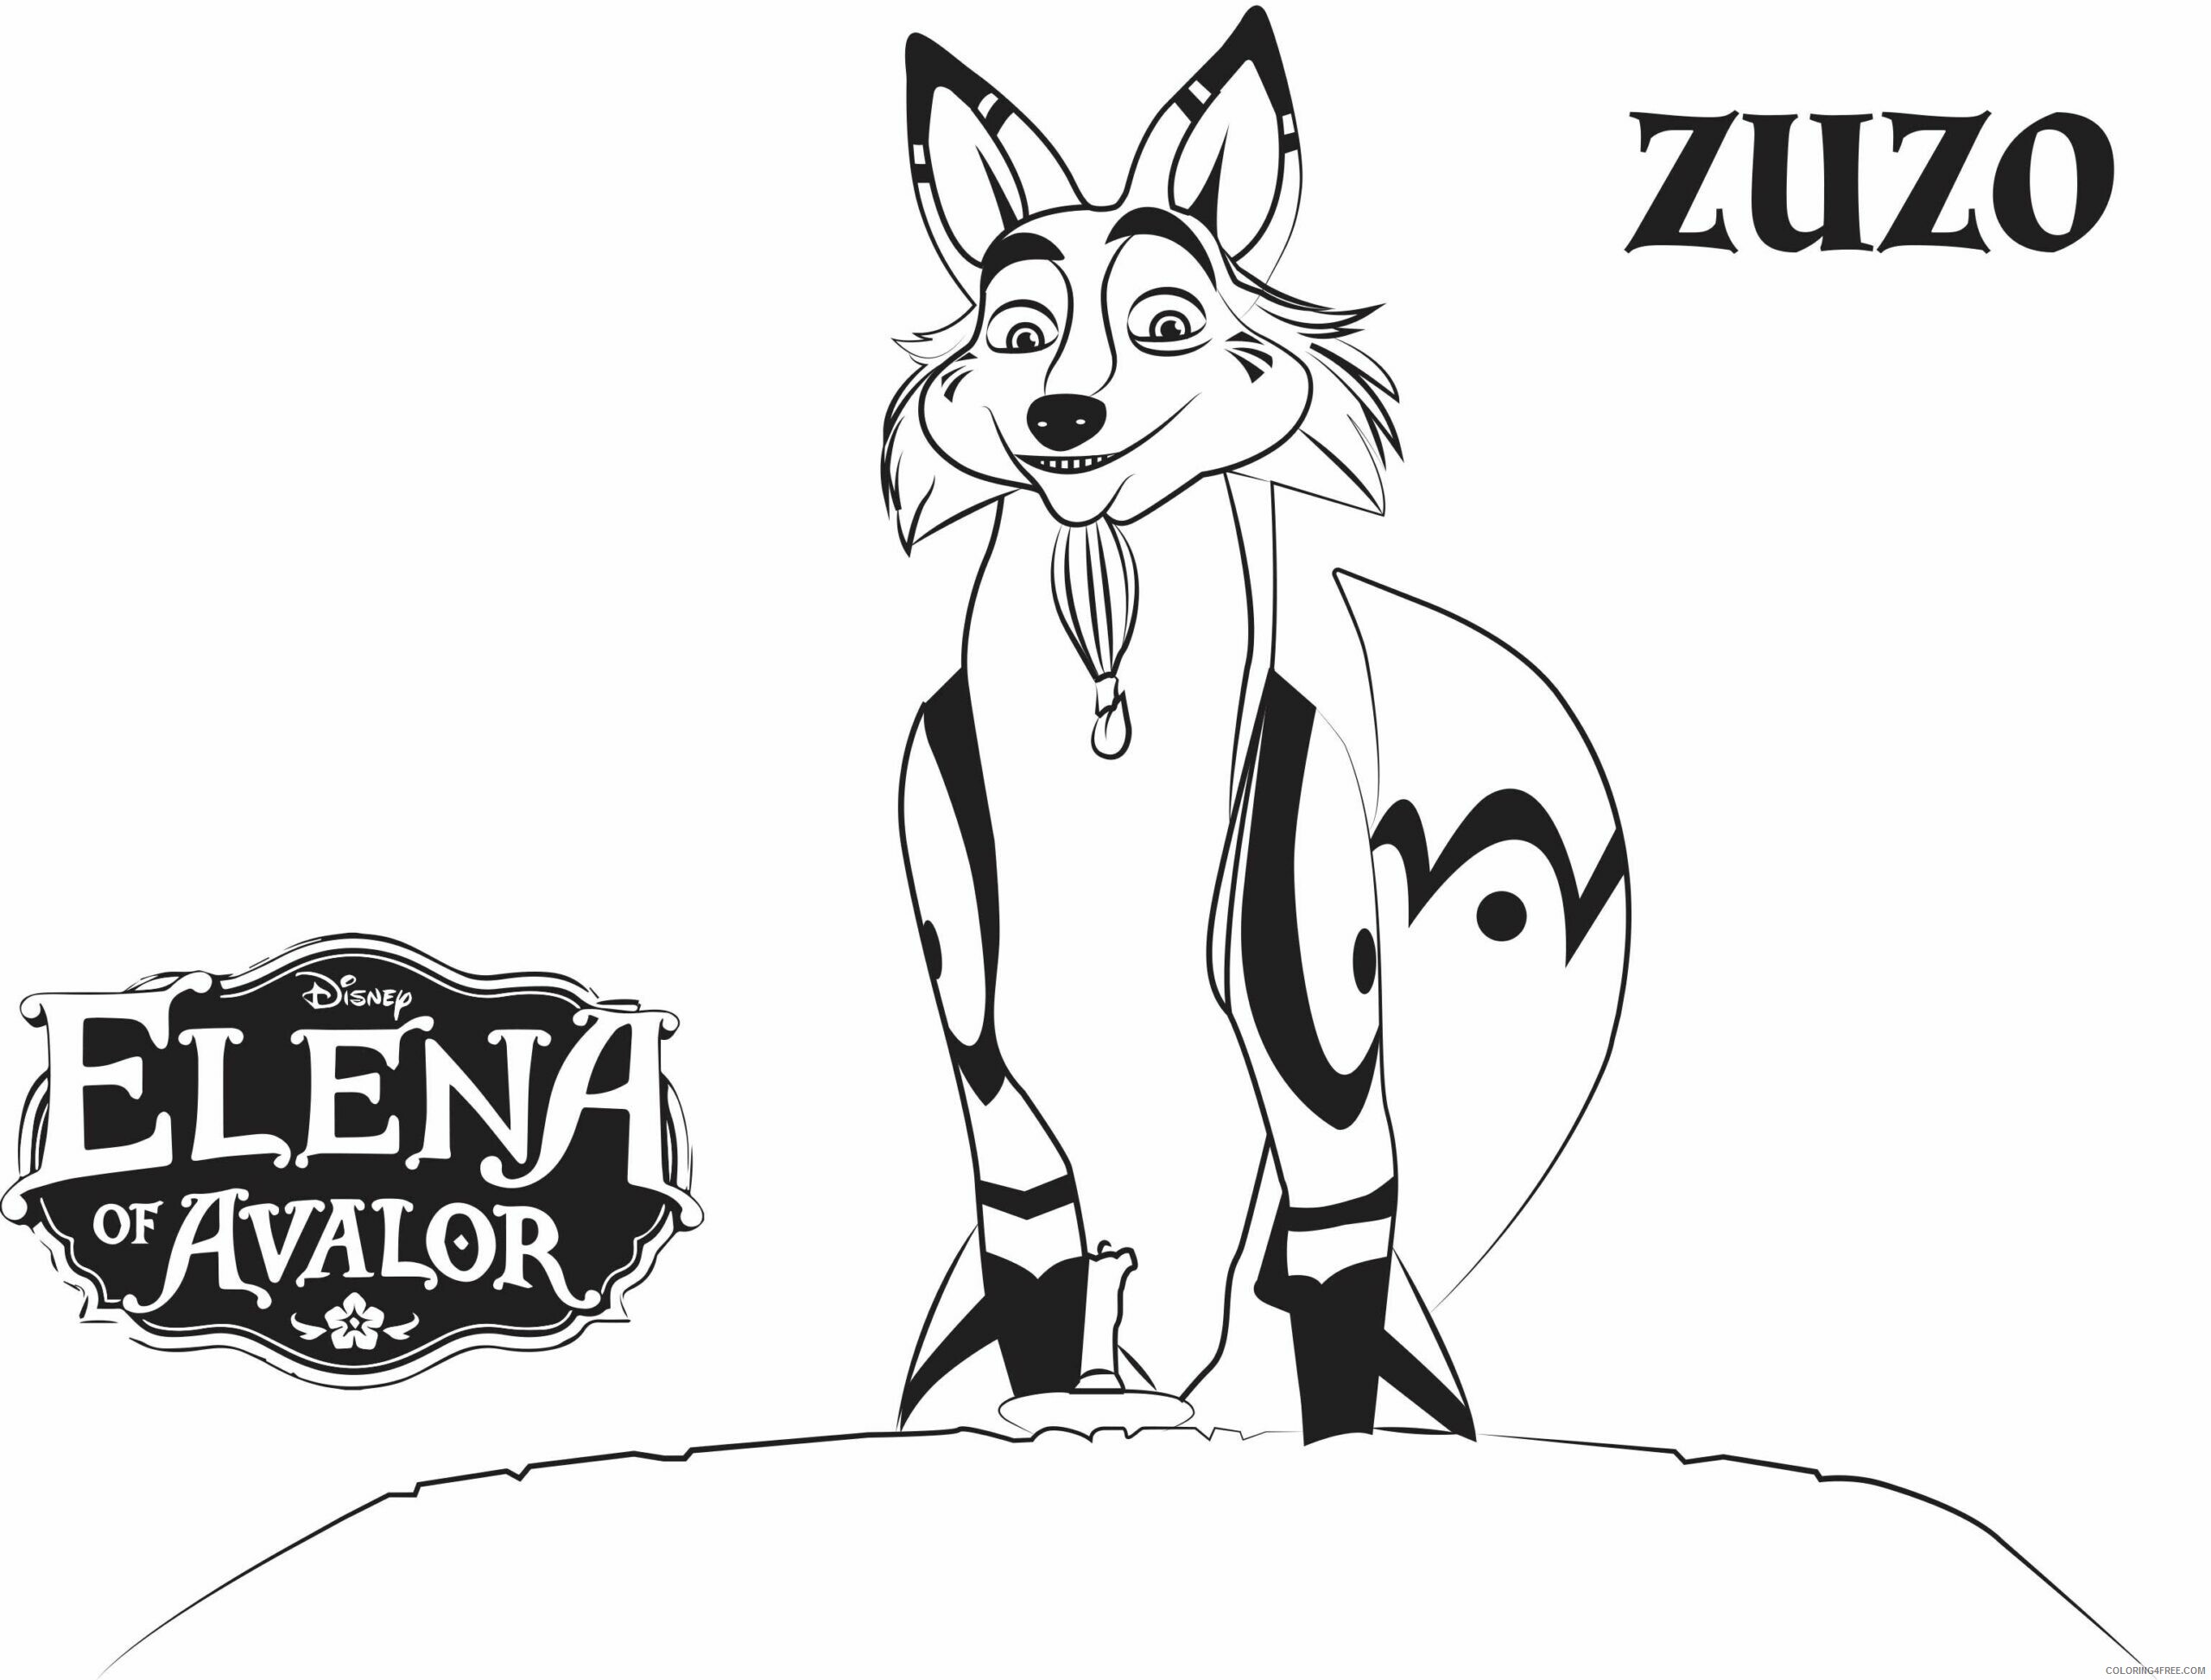 Elena of Avalor Coloring Pages TV Film Elena of Avalor Zuzo Printable 2020 02637 Coloring4free